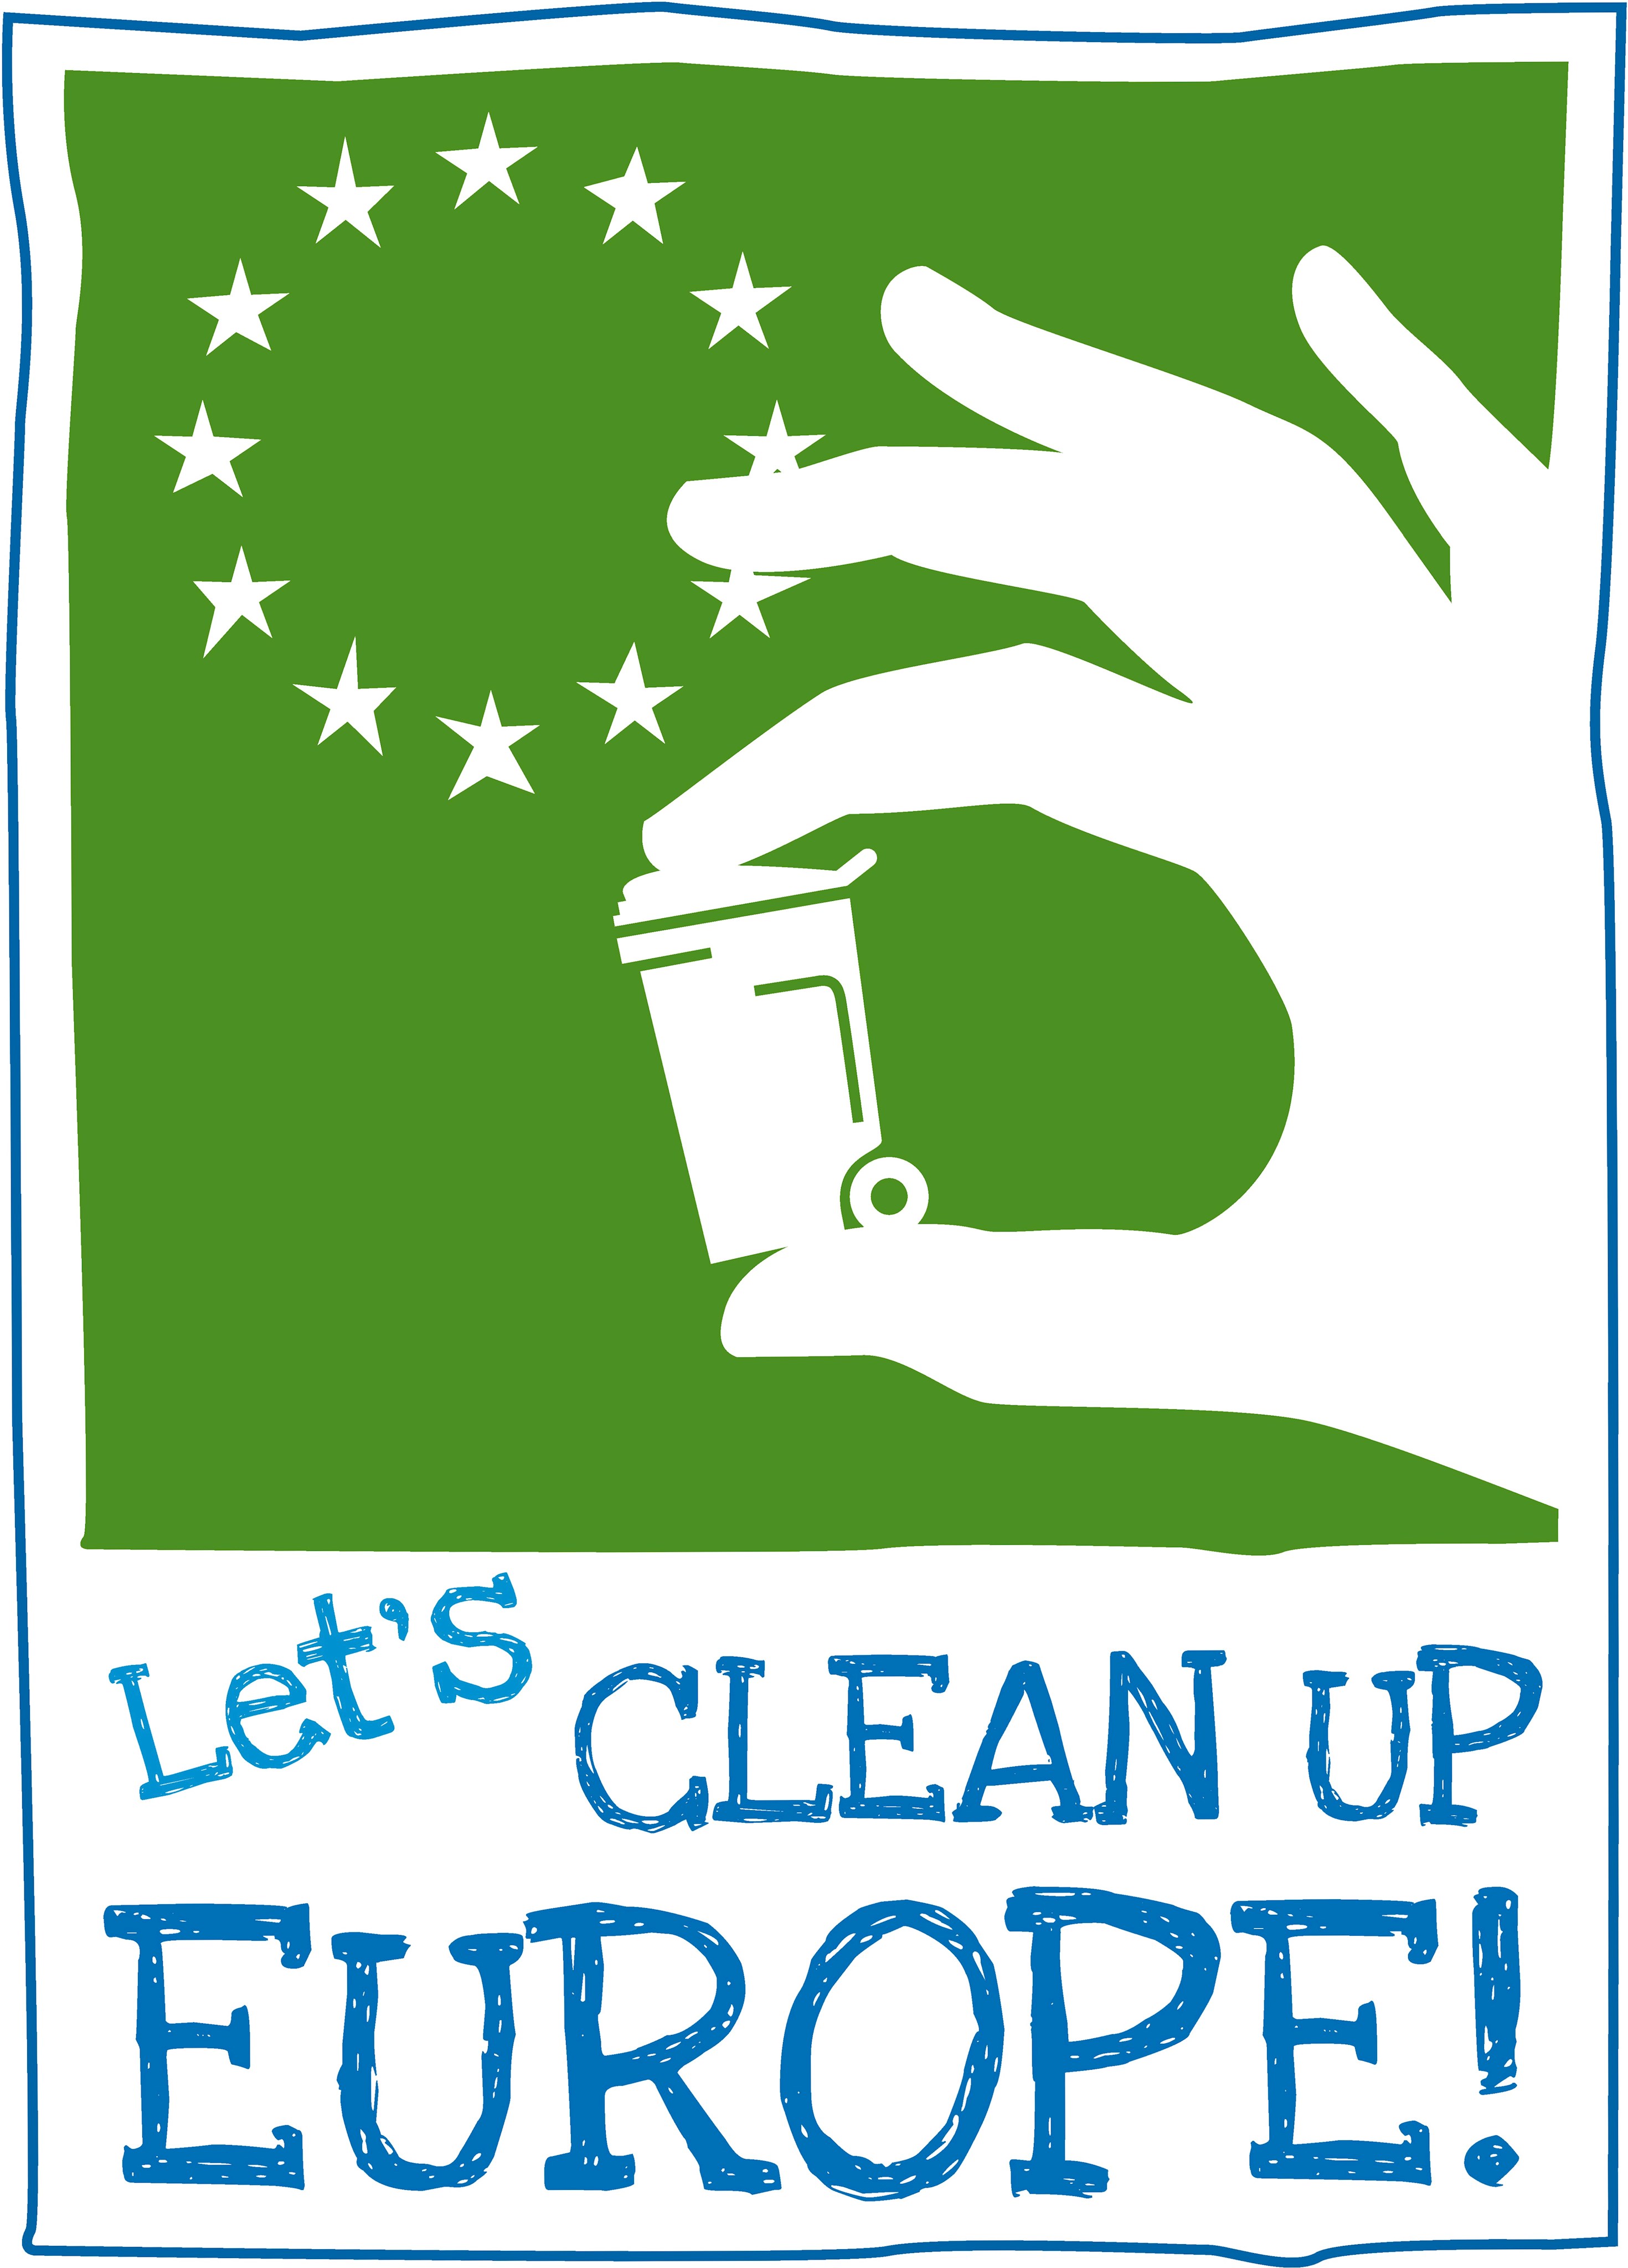 Logo let's clean up europa